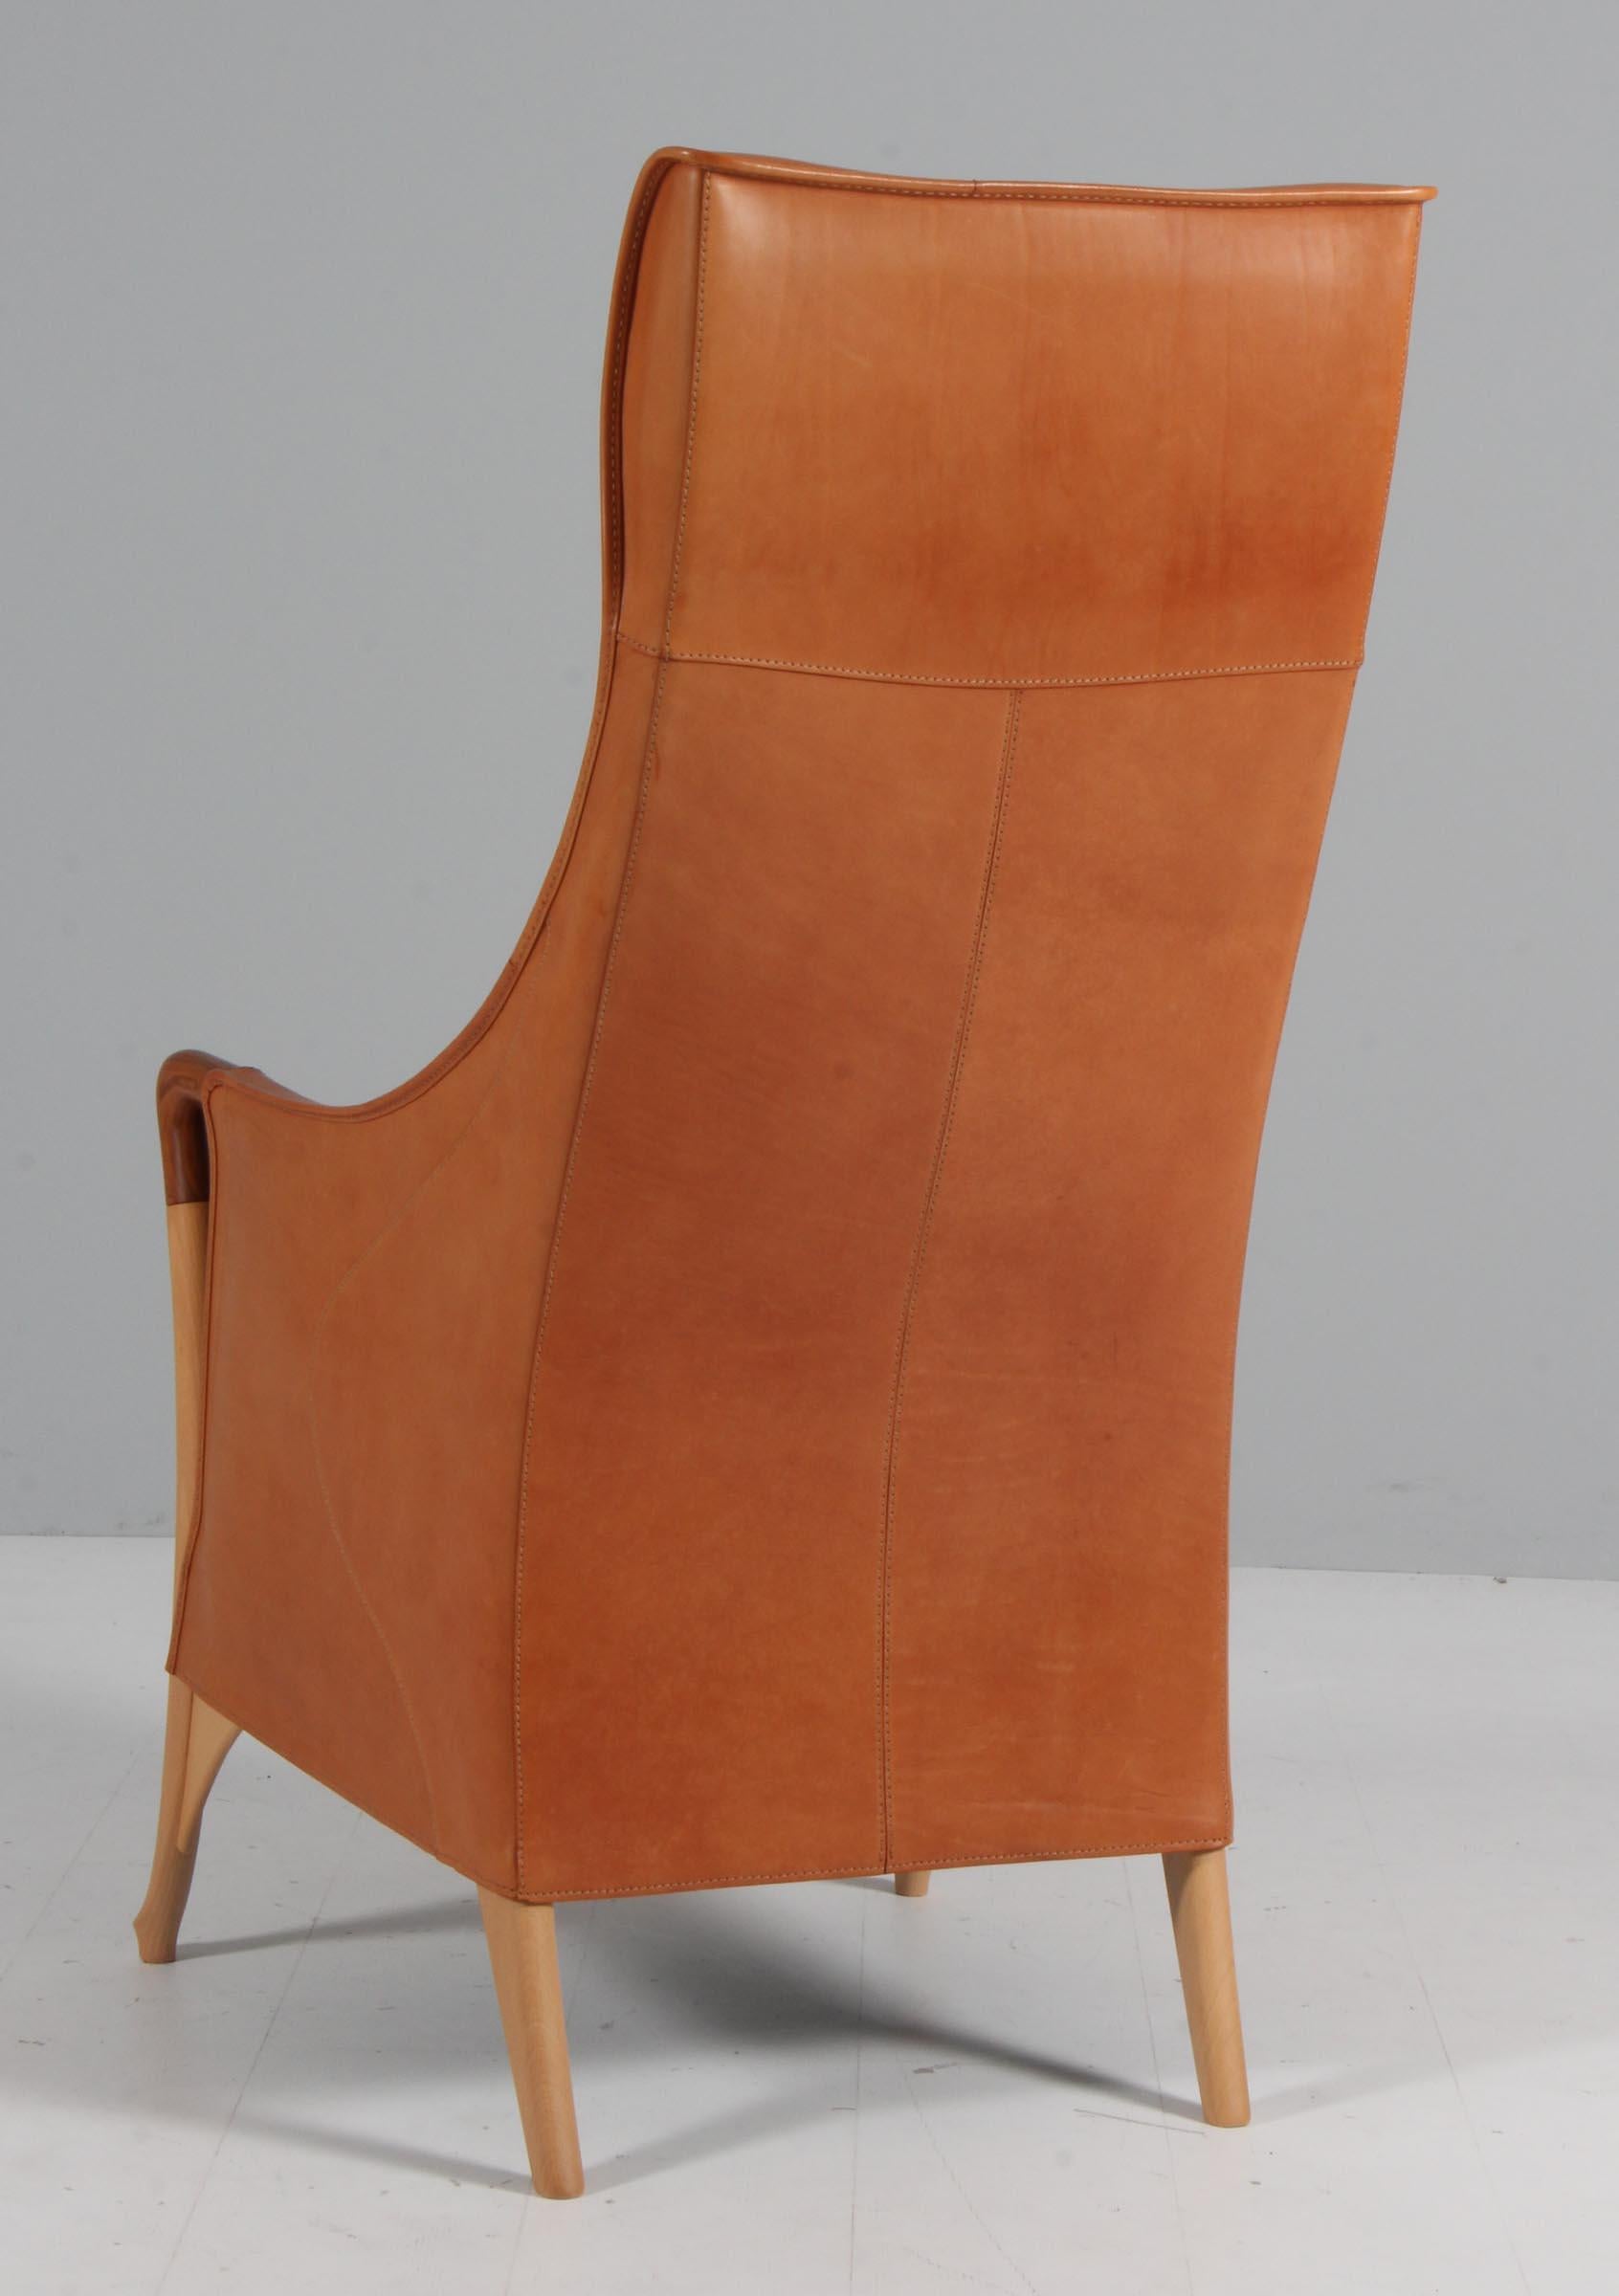 Umberto Asnago for Giorgetti lounge chair in saddle leather For Sale 1